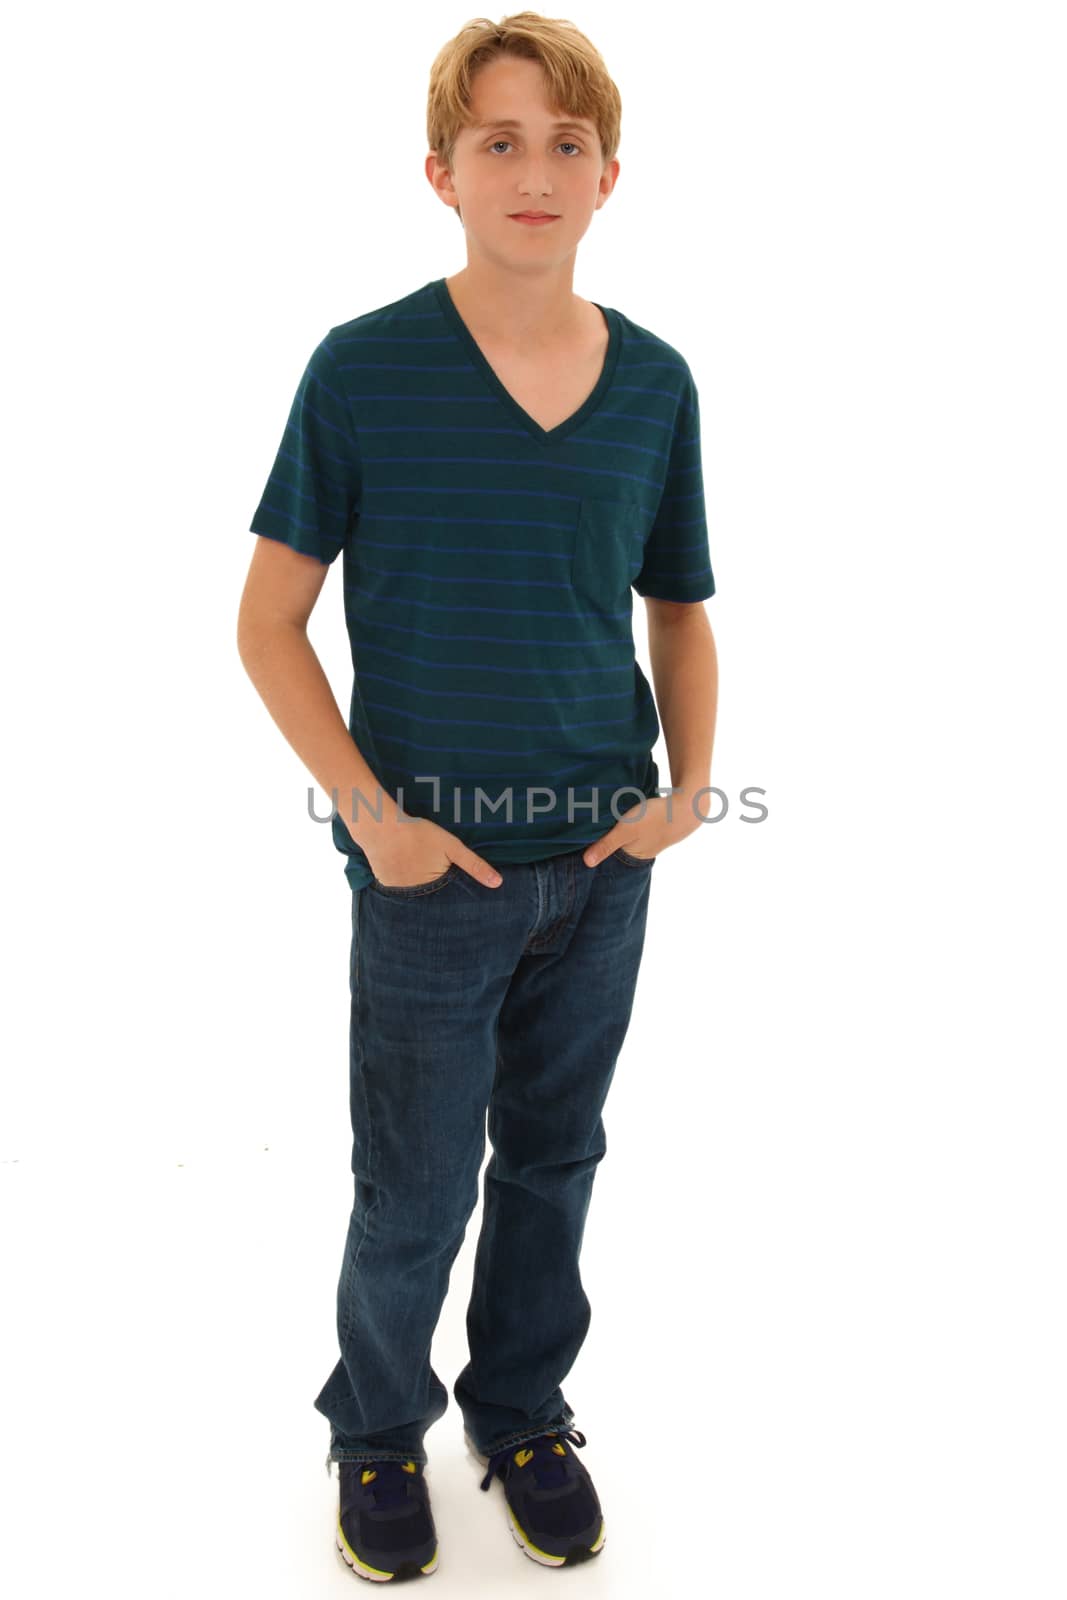 Attractive Teen Boy Caucasian Standing with Hands in Pockets. Serious expression.